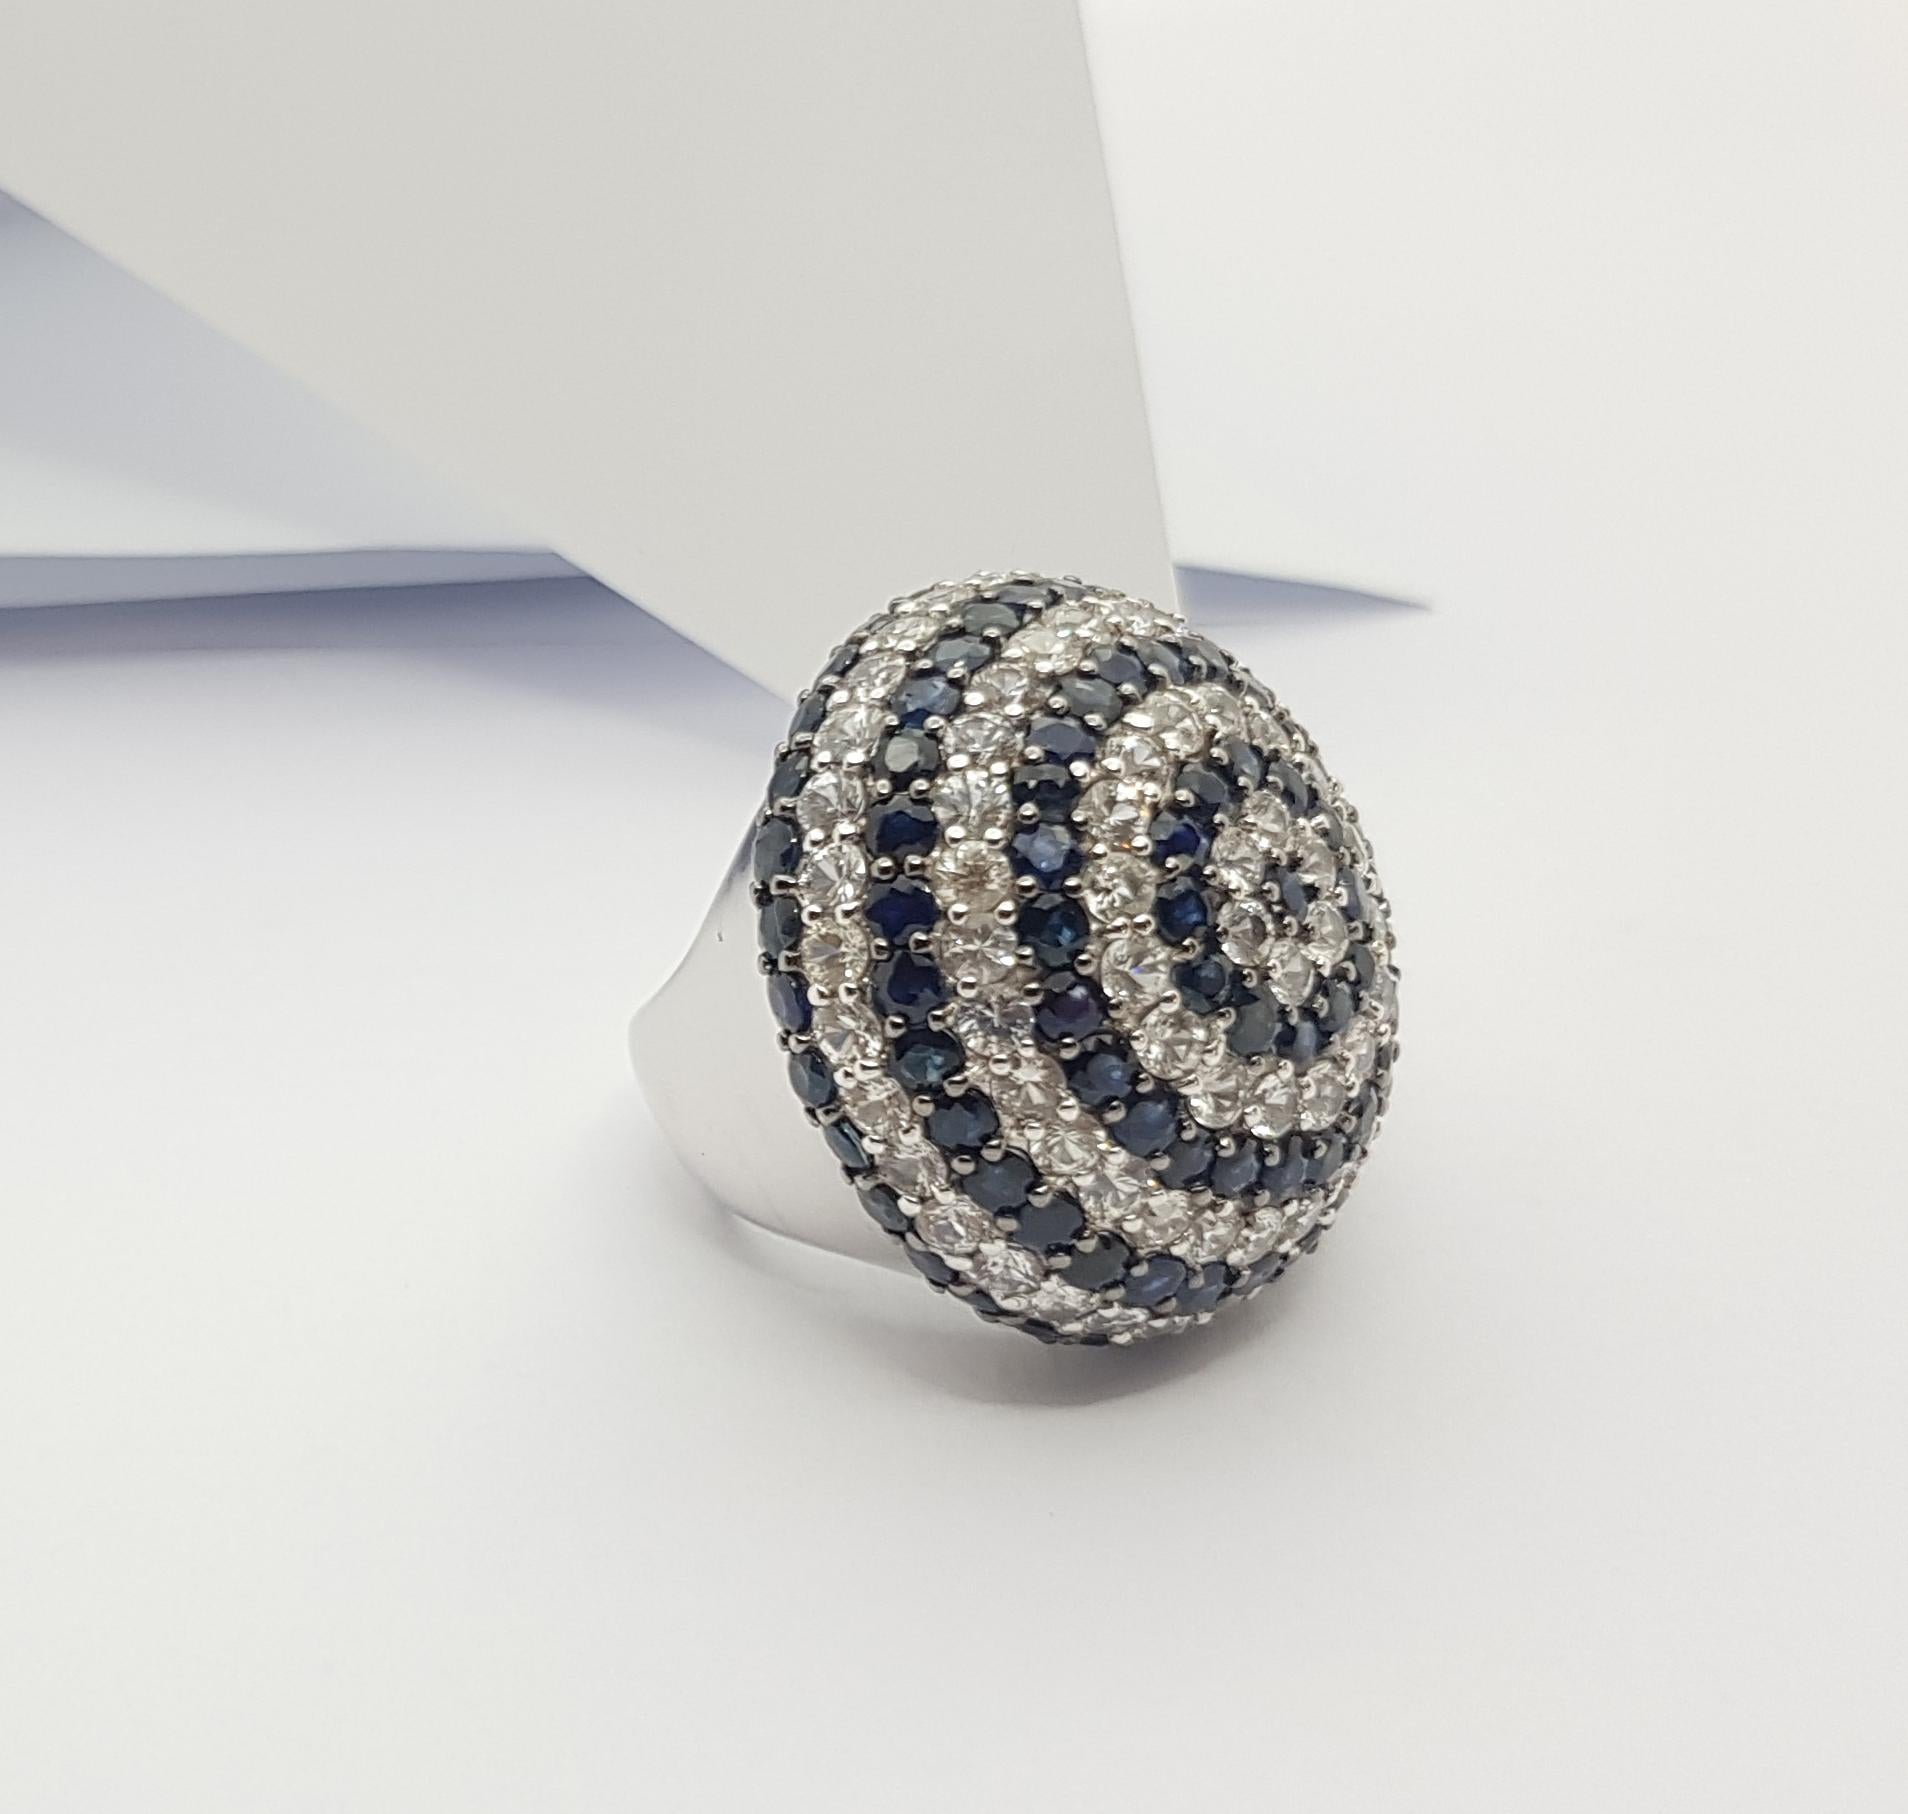 White Sapphire 8.97 carats and Blue Sapphire 11.27 carats Ring set in Silver Settings

Width:  3.2 cm 
Length: 3.2 cm
Ring Size: 55
Total Weight: 23.38 grams

*Please note that the silver setting is plated with rhodium to promote shine and help